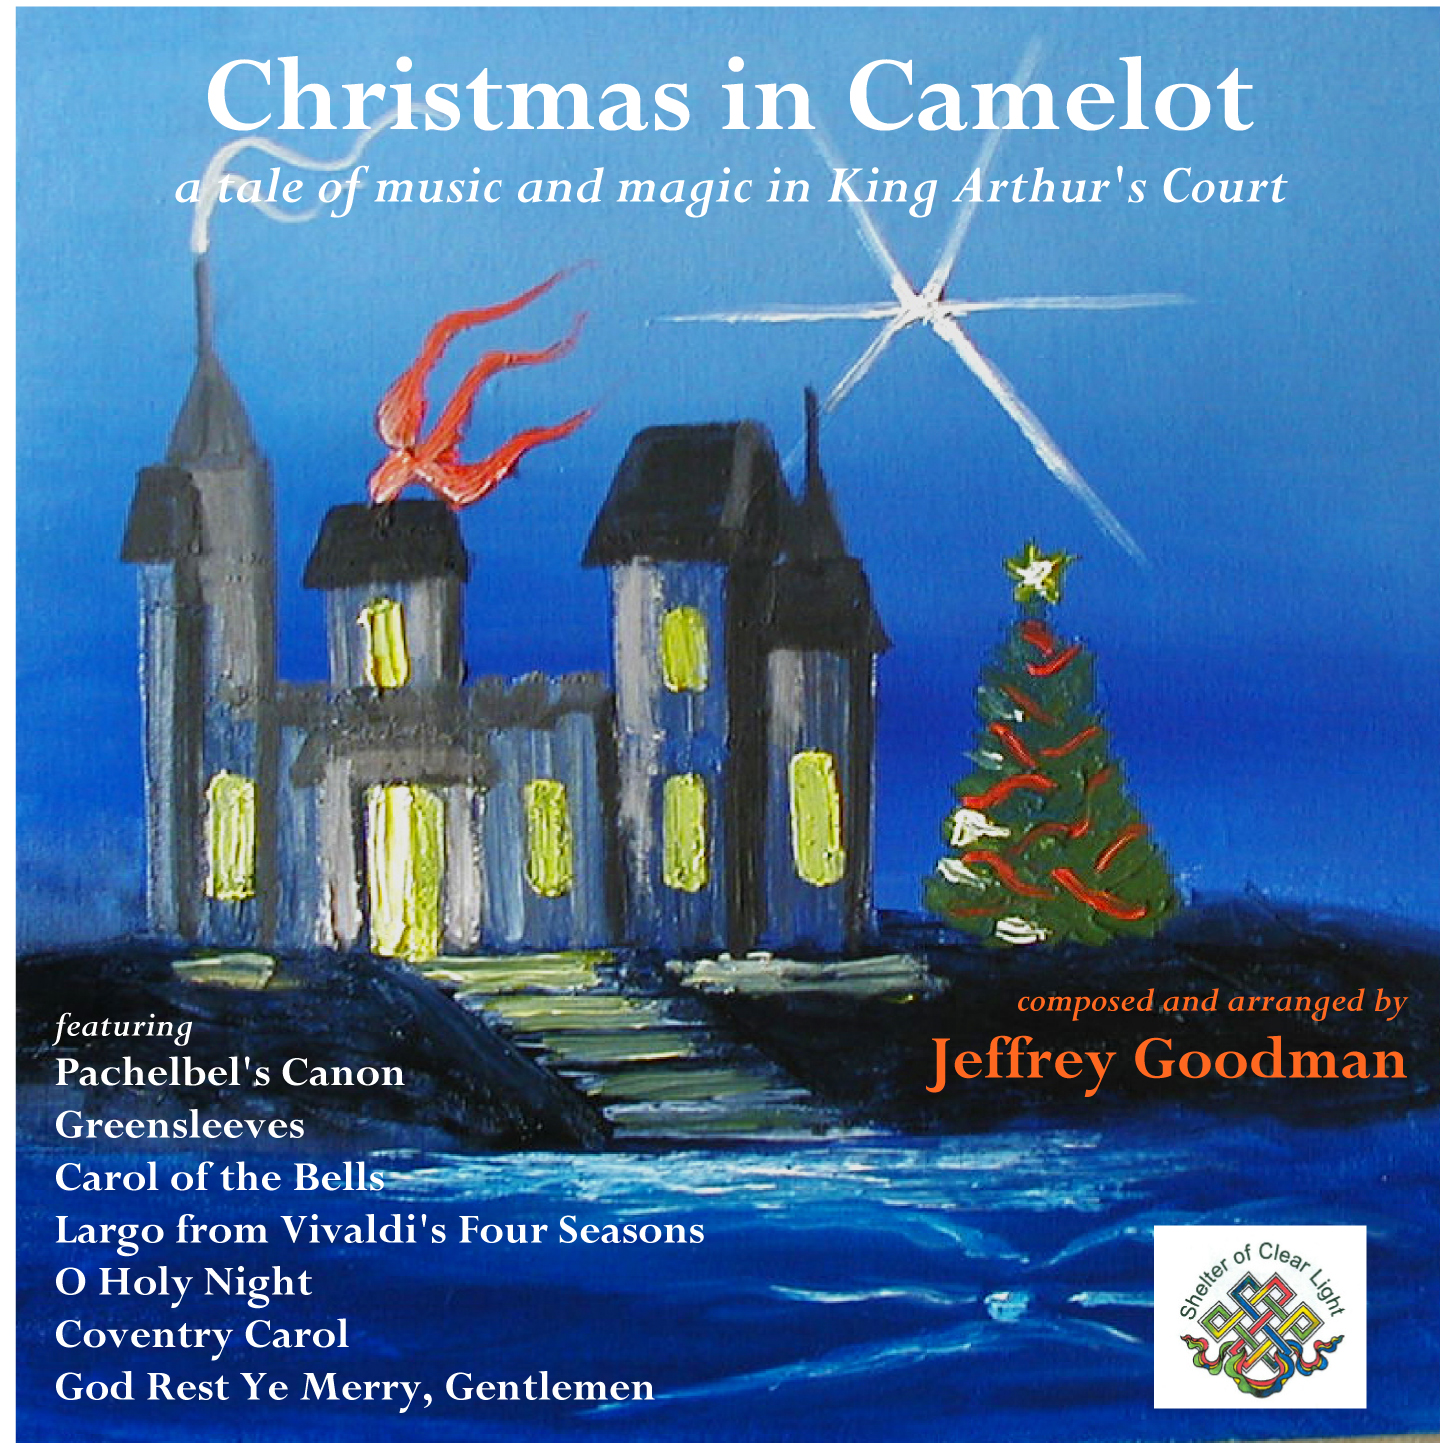 Christmas in Camelot front cover art.jpg